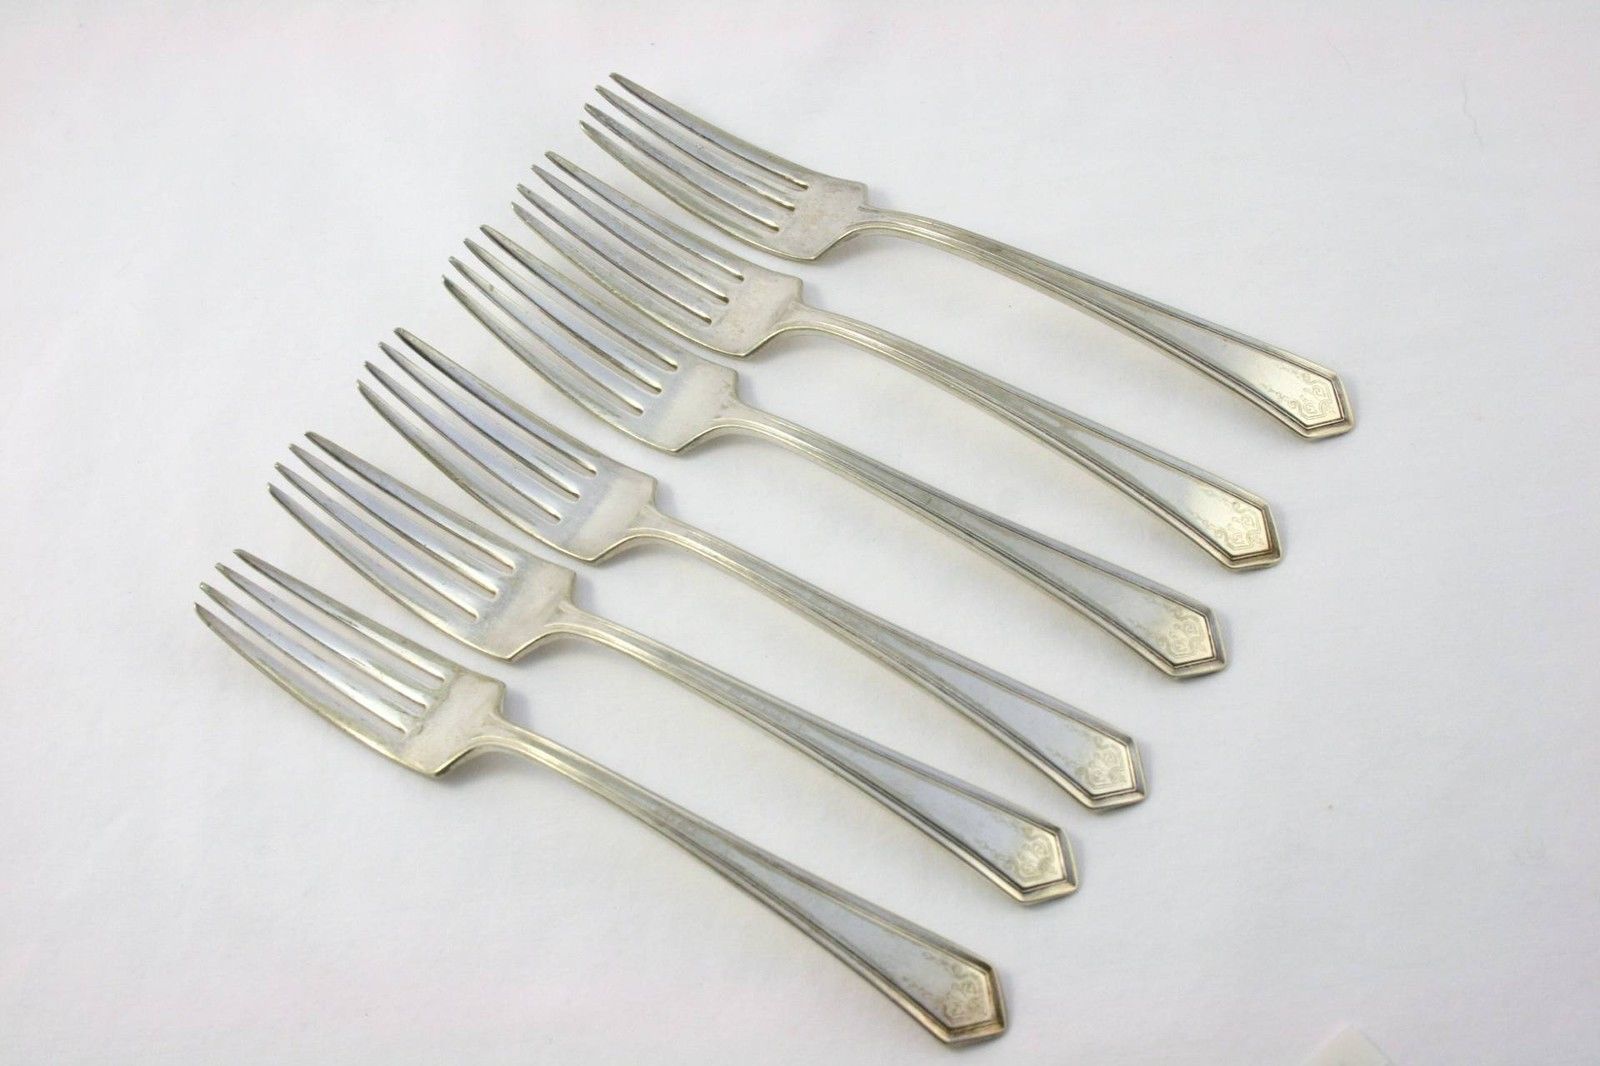 Primary image for -1865 WM ROGERS MFG XII- Sectional Silverplate LaSalle Set/6 Dinner Forks   #468